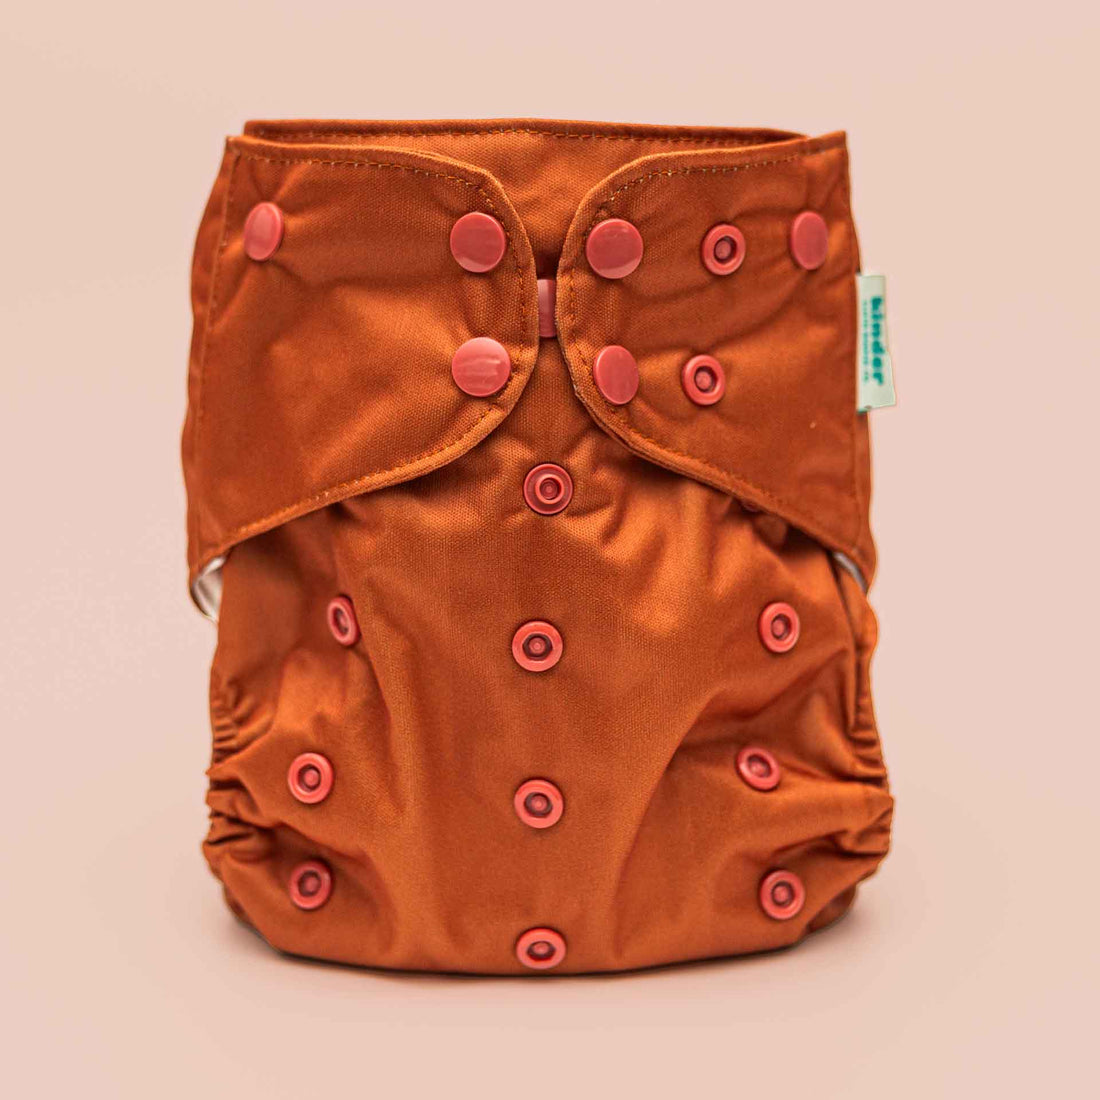 Boho Basics Pocket Cloth Diaper with Athletic Wicking Jersey